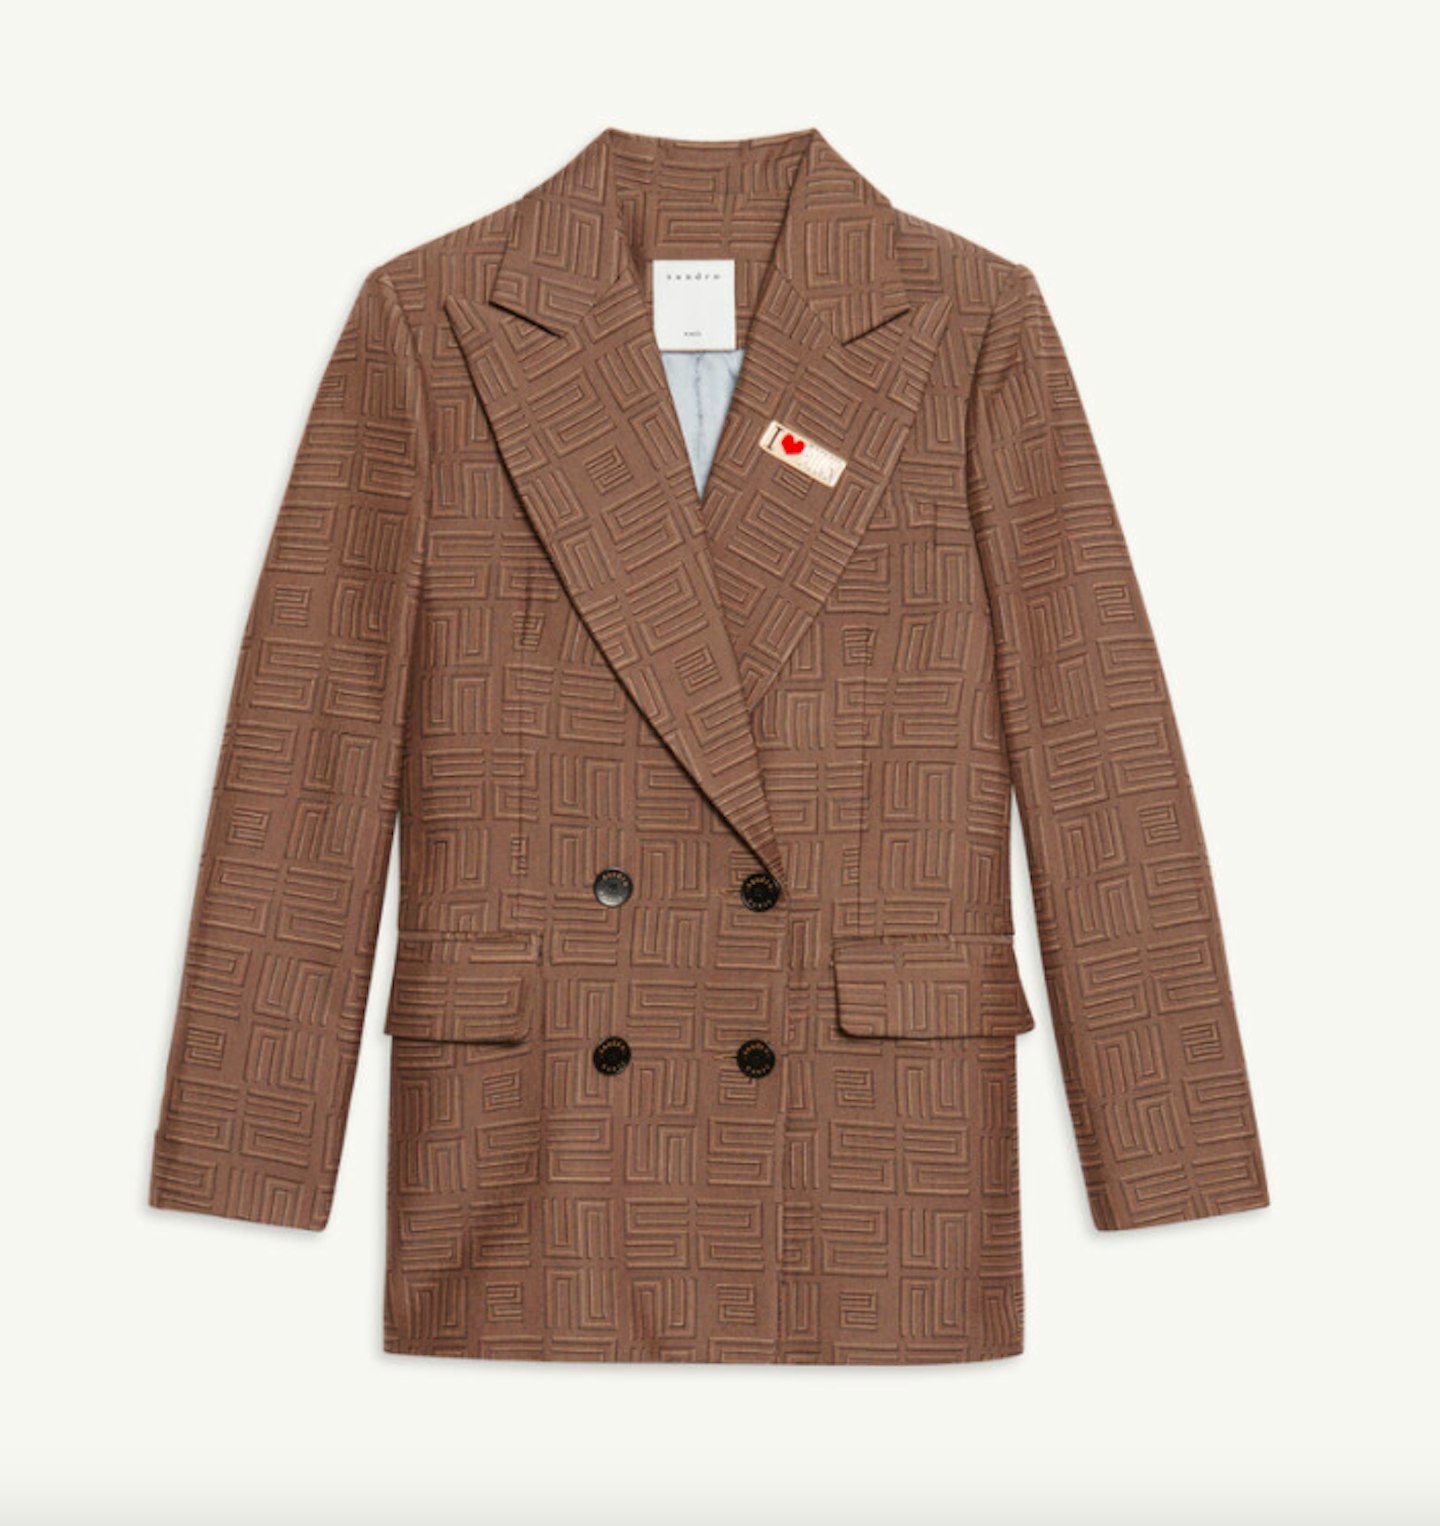 Sandro, Jacquard Tailored Jacket, WAS £439 NOW £307.30